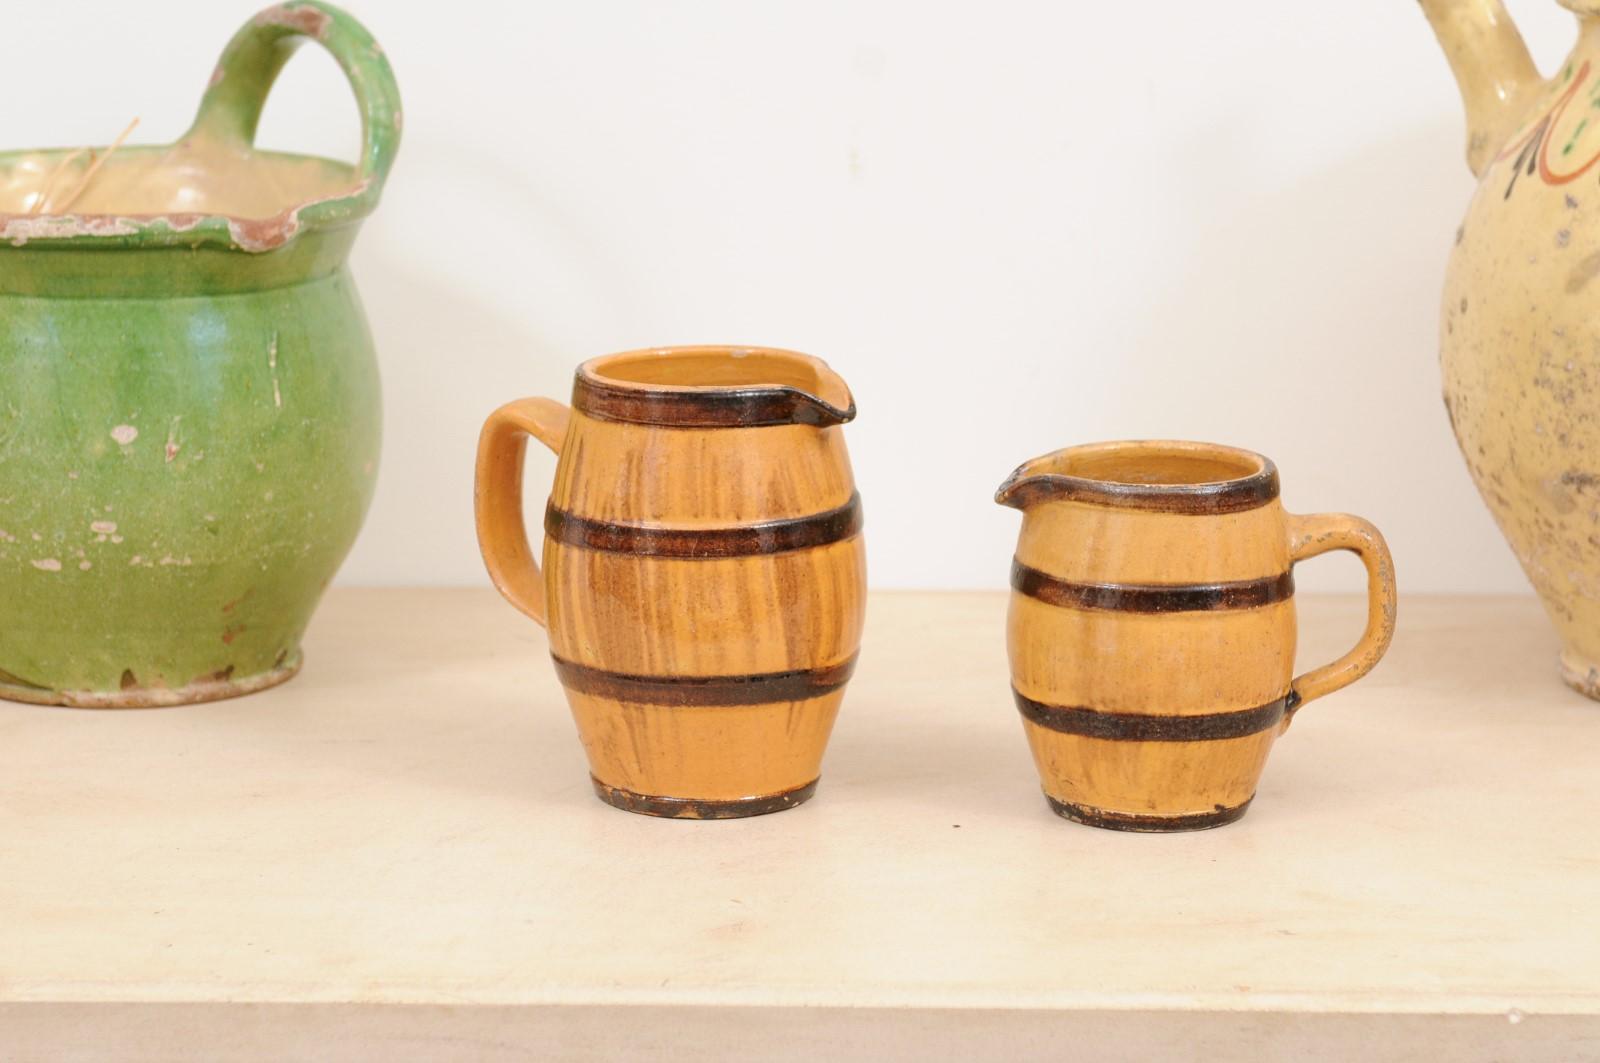 Two rustic French pottery pitchers from the 19th century, with yellow glaze, brown accents and back handles. They are priced and sold individually, $250 each. Created in France during the 19th century, each of these pitchers features a yellow glazed